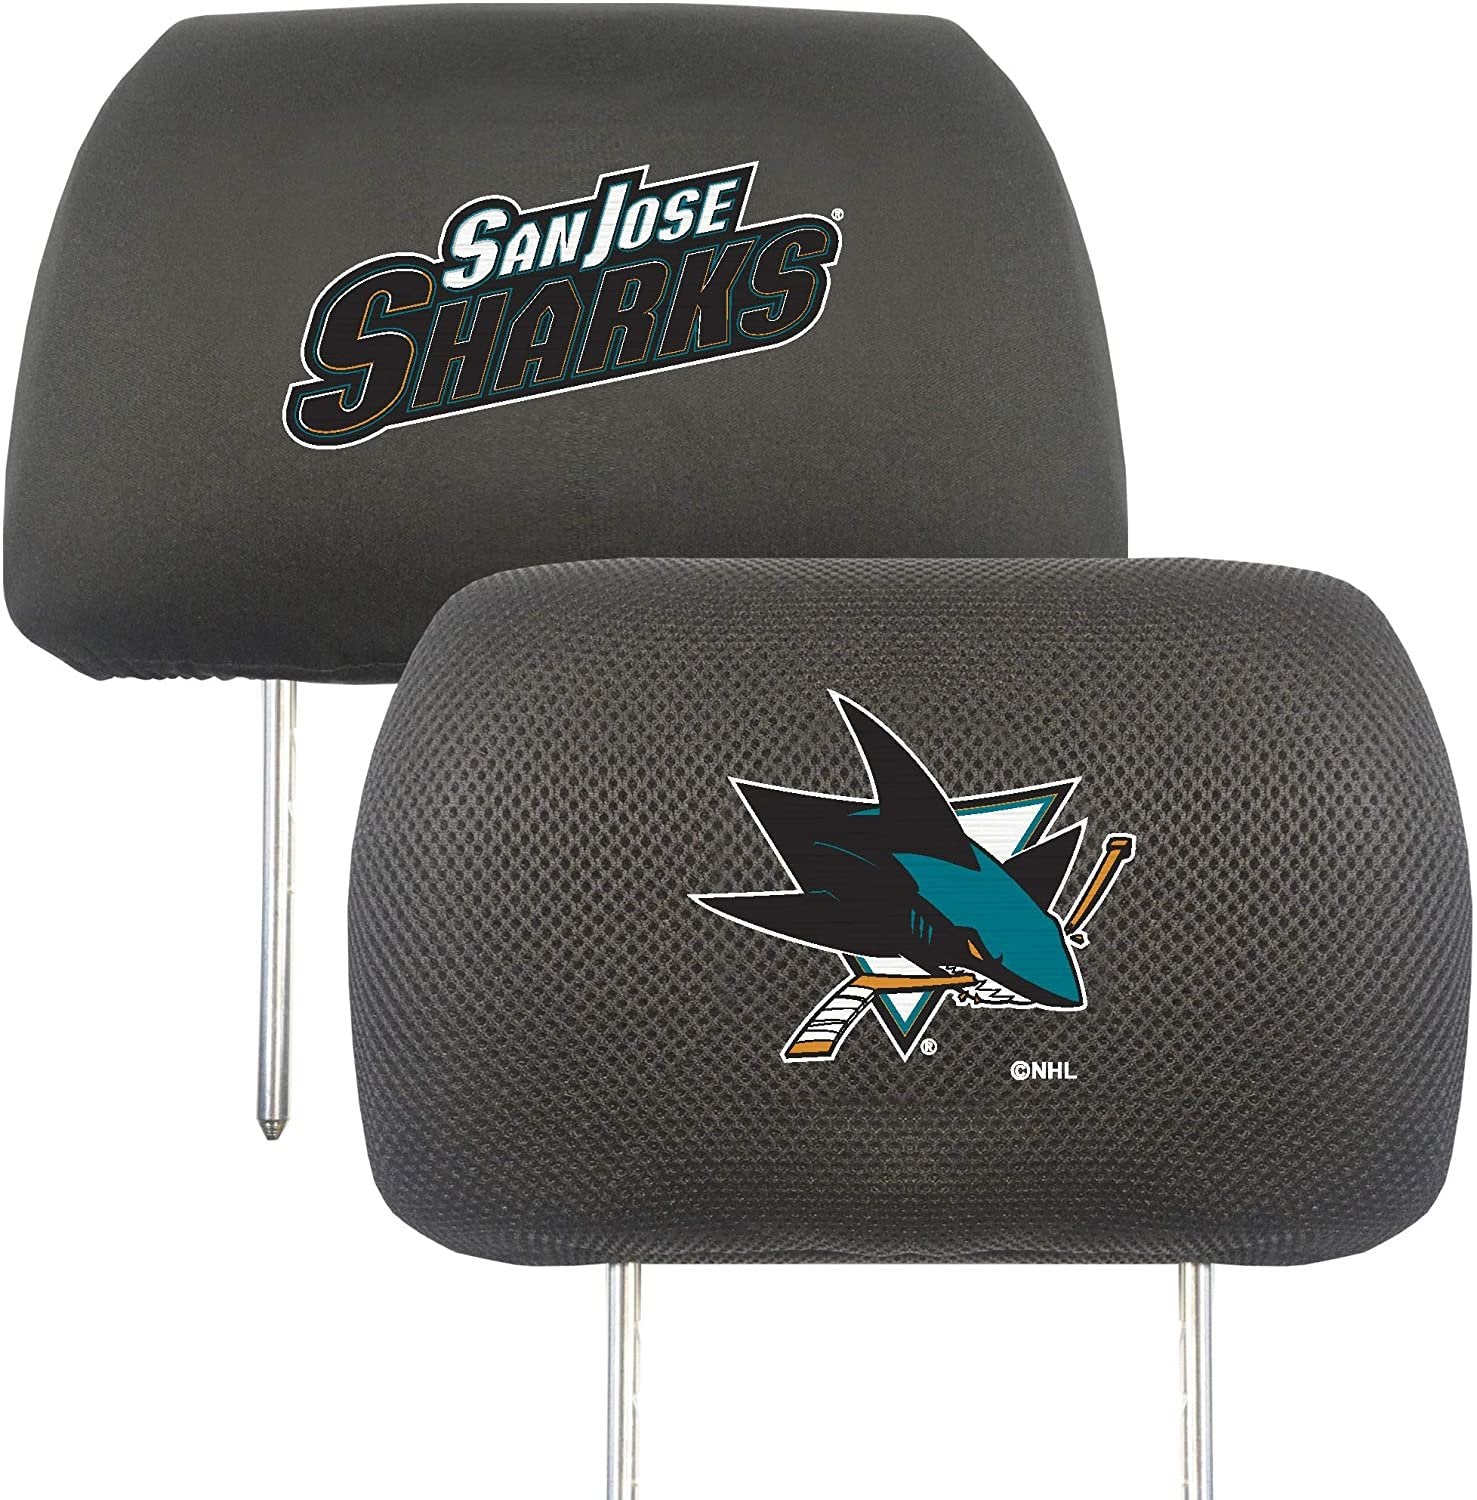 San Jose Sharks Pair of Premium Auto Head Rest Covers, Embroidered, Black Elastic, 14x10 Inch